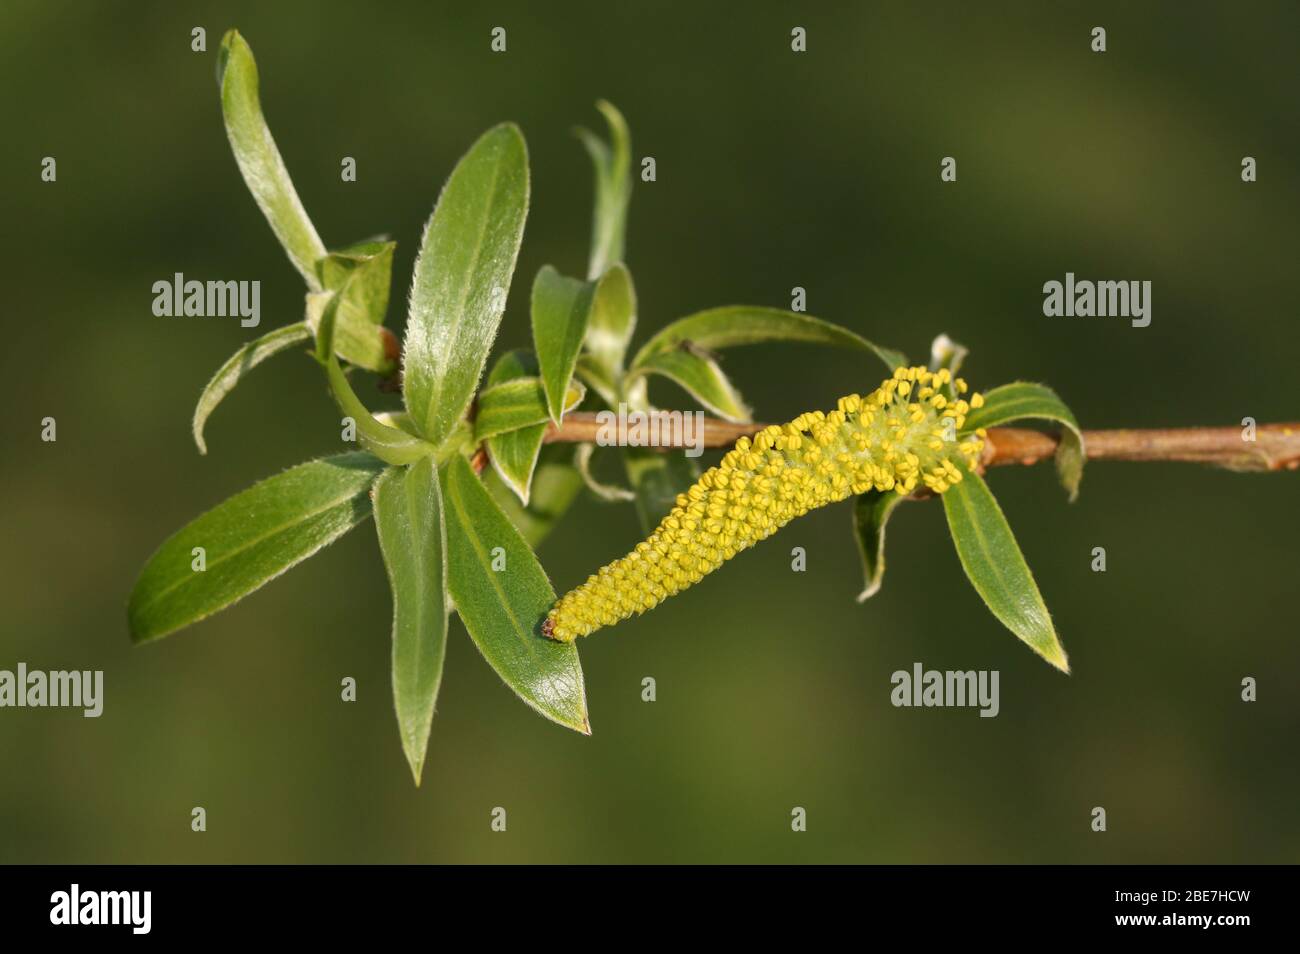 The leaves and flower of a White Weeping or Weeping Willow Tree, Salix alba, growing at the edge of water in spring. Stock Photo